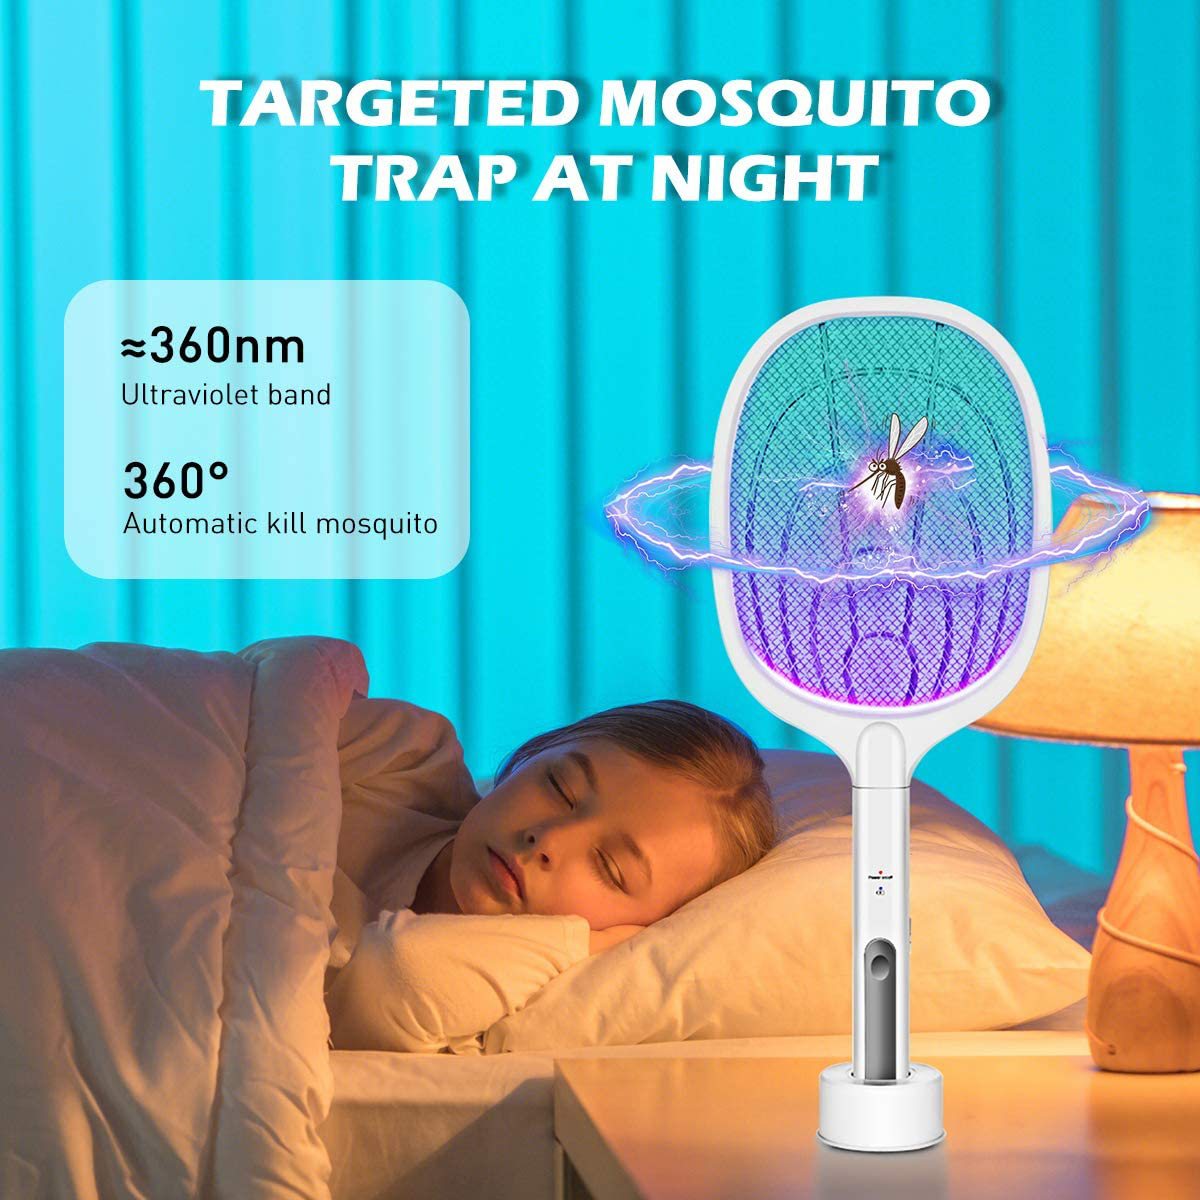 AICase Bug Zapper, 3000 Volt Indoor & Outdoor Electric Fly Swatter, USB Rechargeable Mosquito Killer Racket for Home Bedroom, Kitchen,Office, Backyard, Patio,Safe to Touch with 3-Layer Safety Mesh